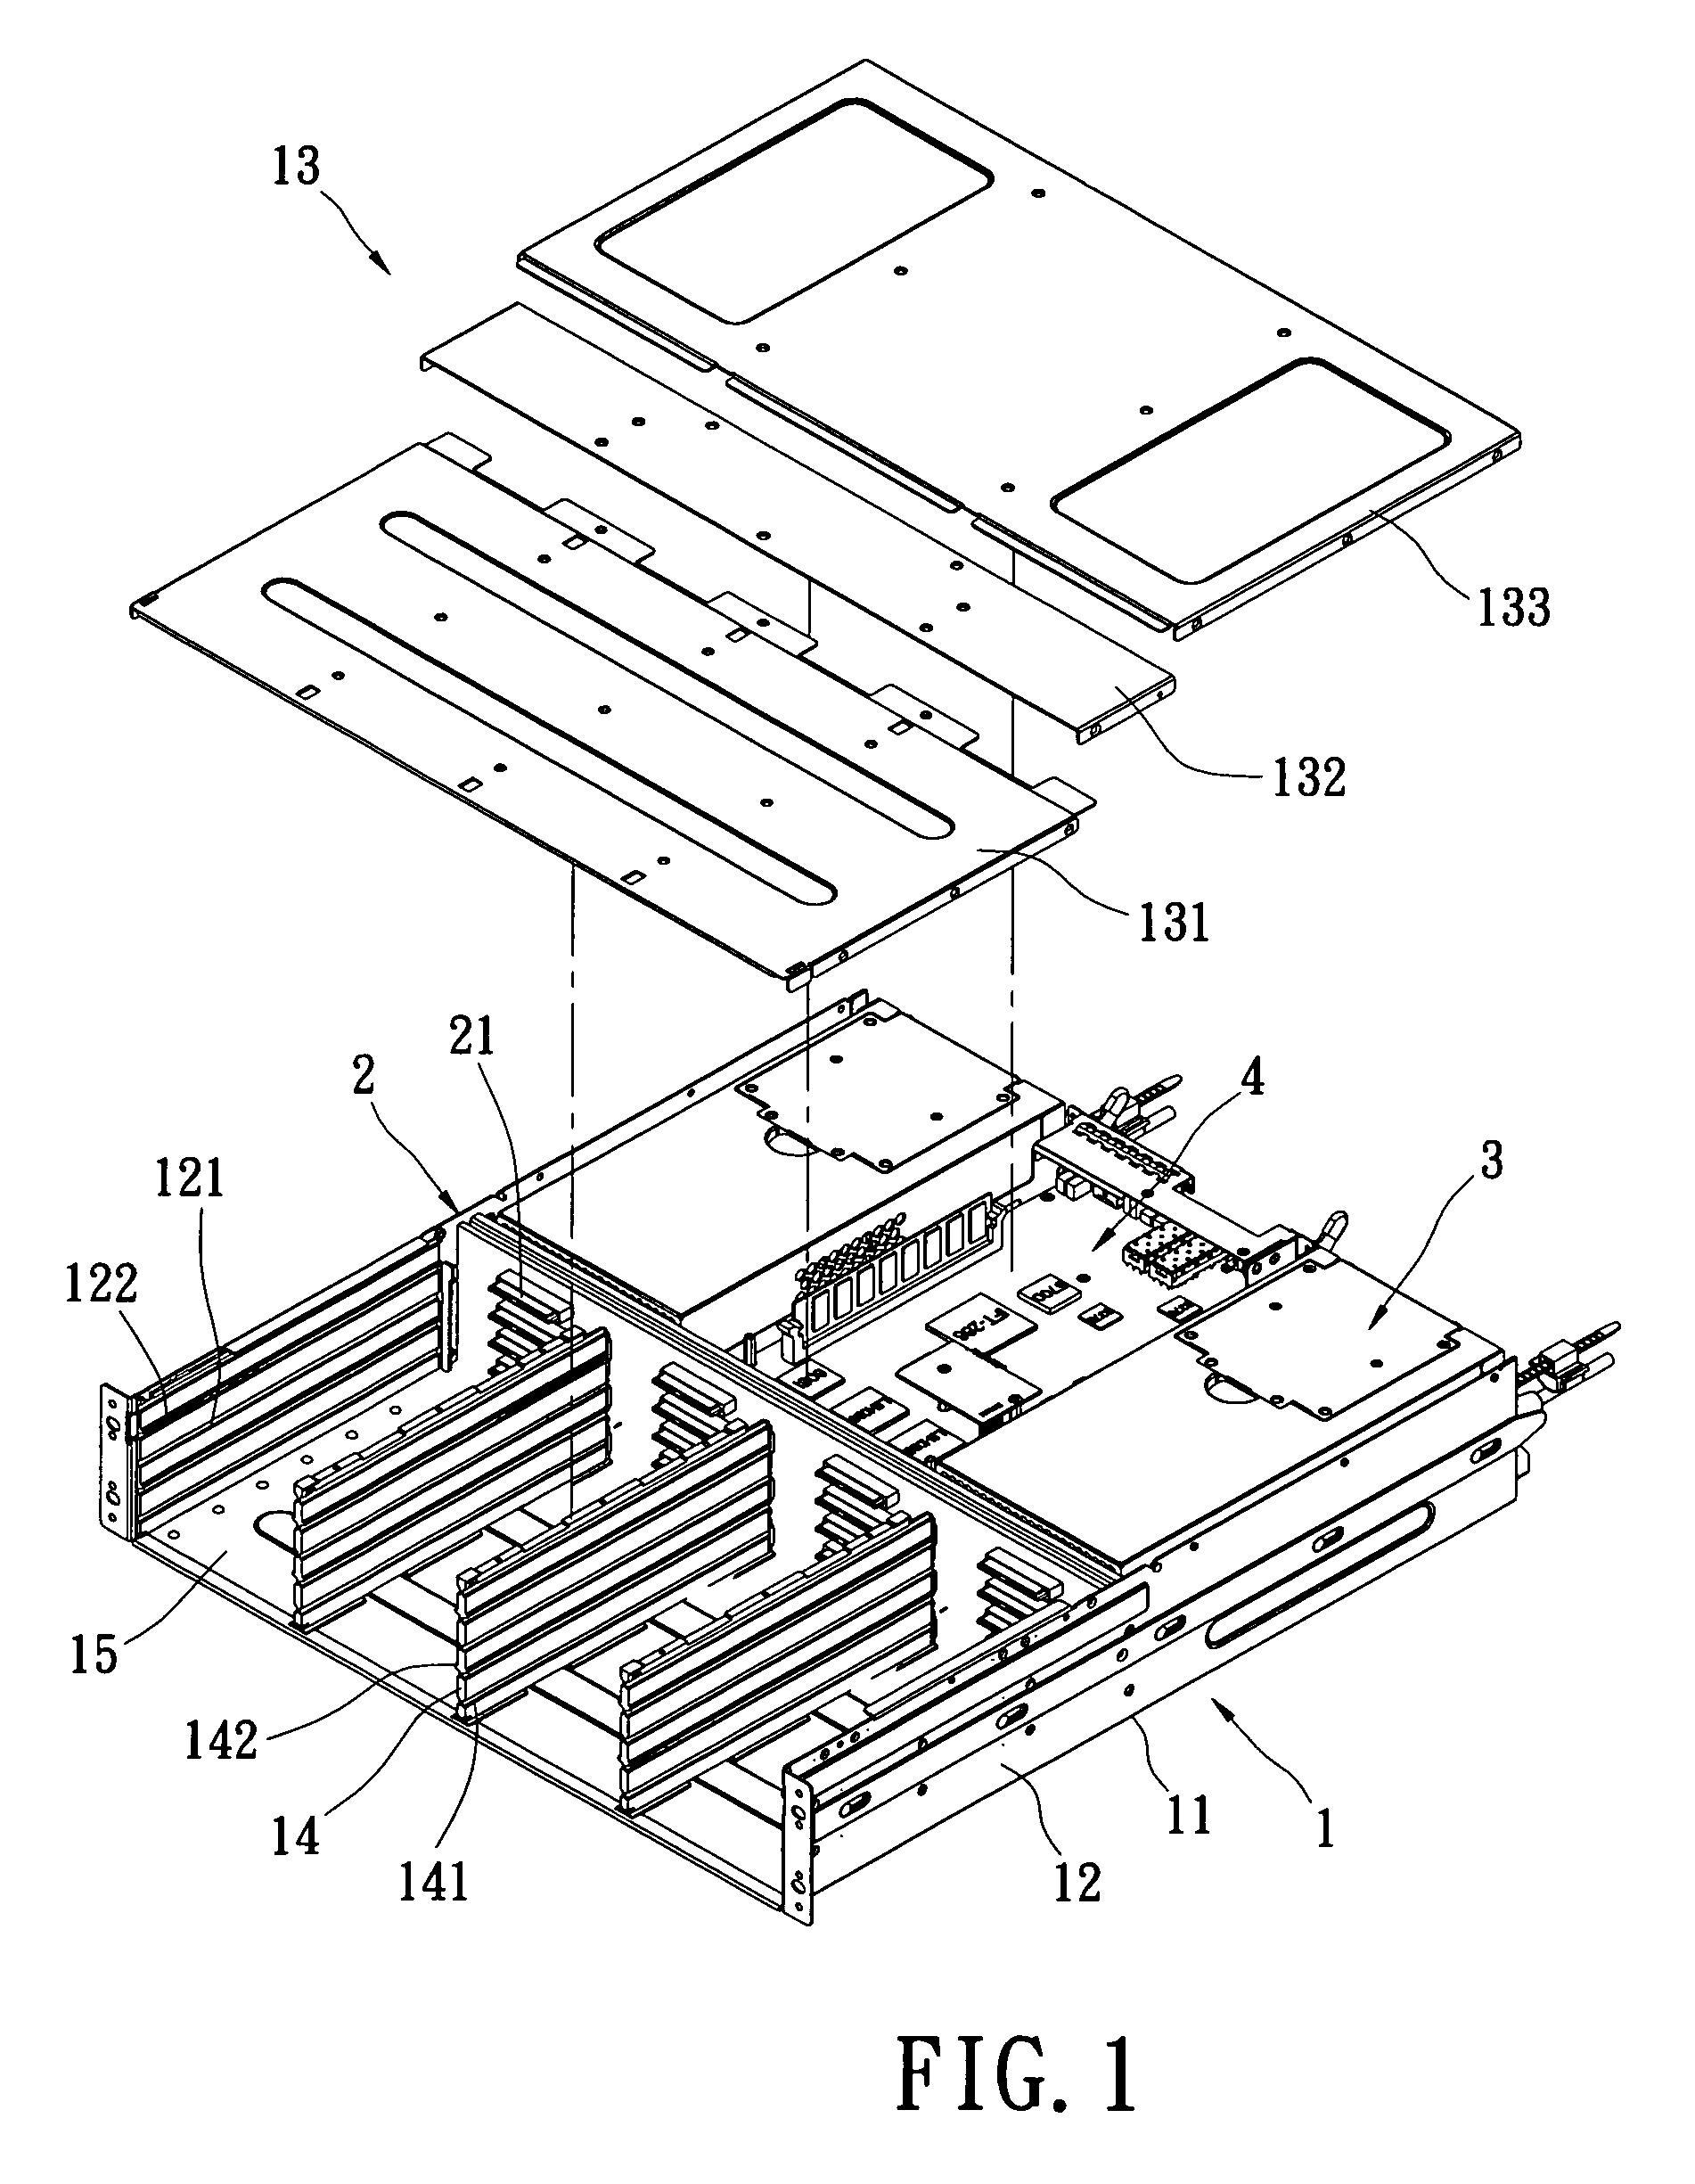 Storage system adapted for receiving a plurality of hard disk drives of different dimensions